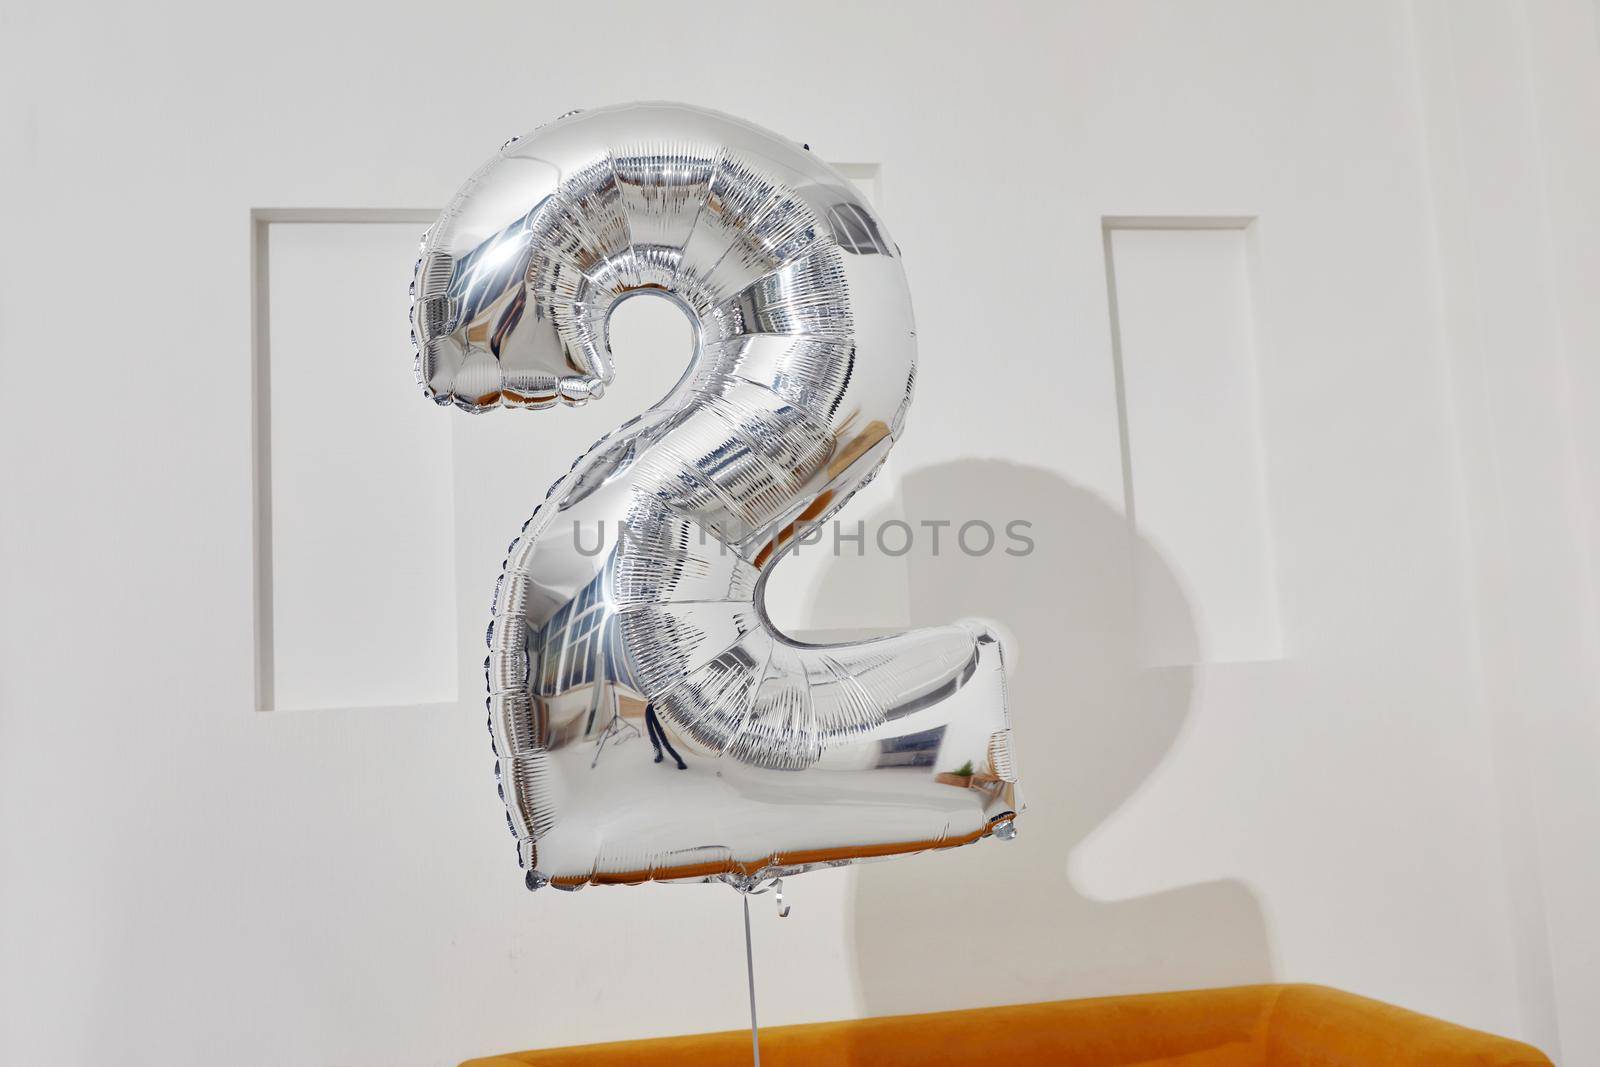 Two year birthday foil balloon against white wall by Demkat